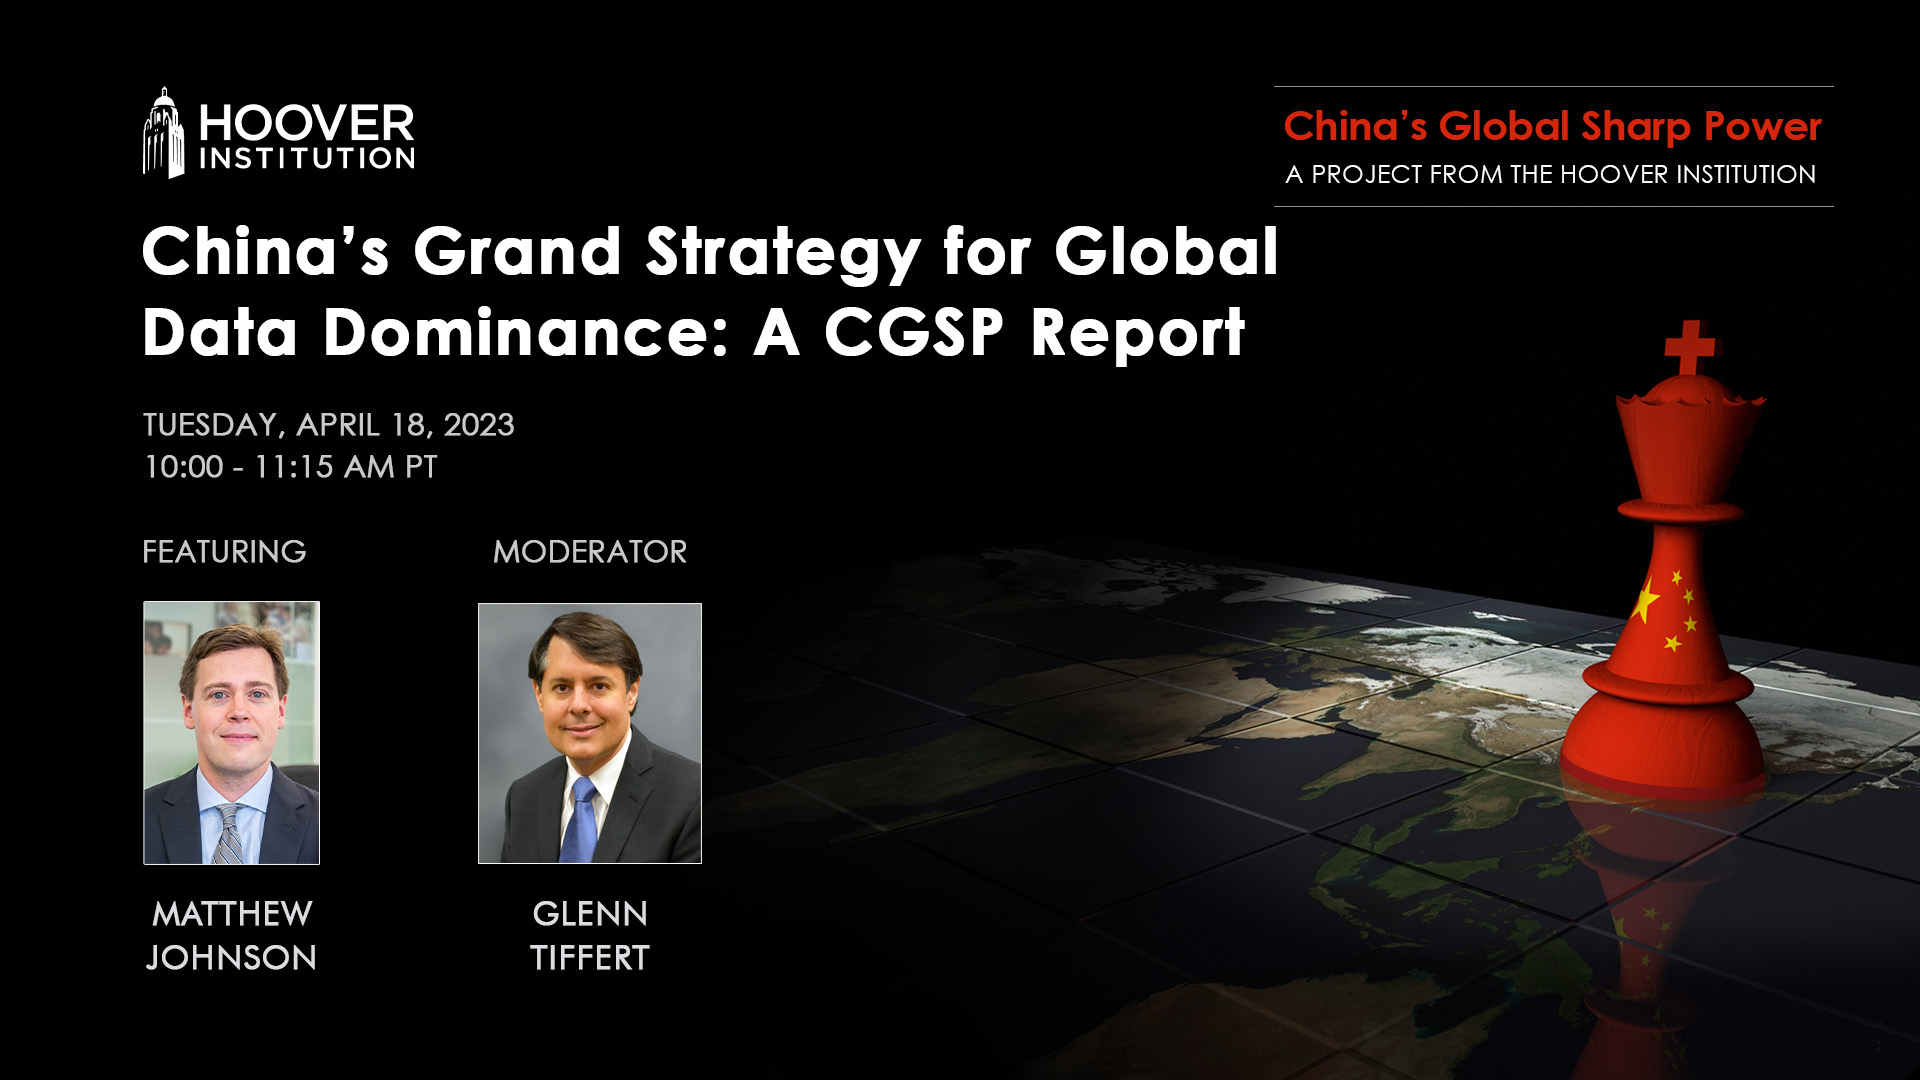 China’s Grand Strategy for Global Data Dominance: A CGSP Report